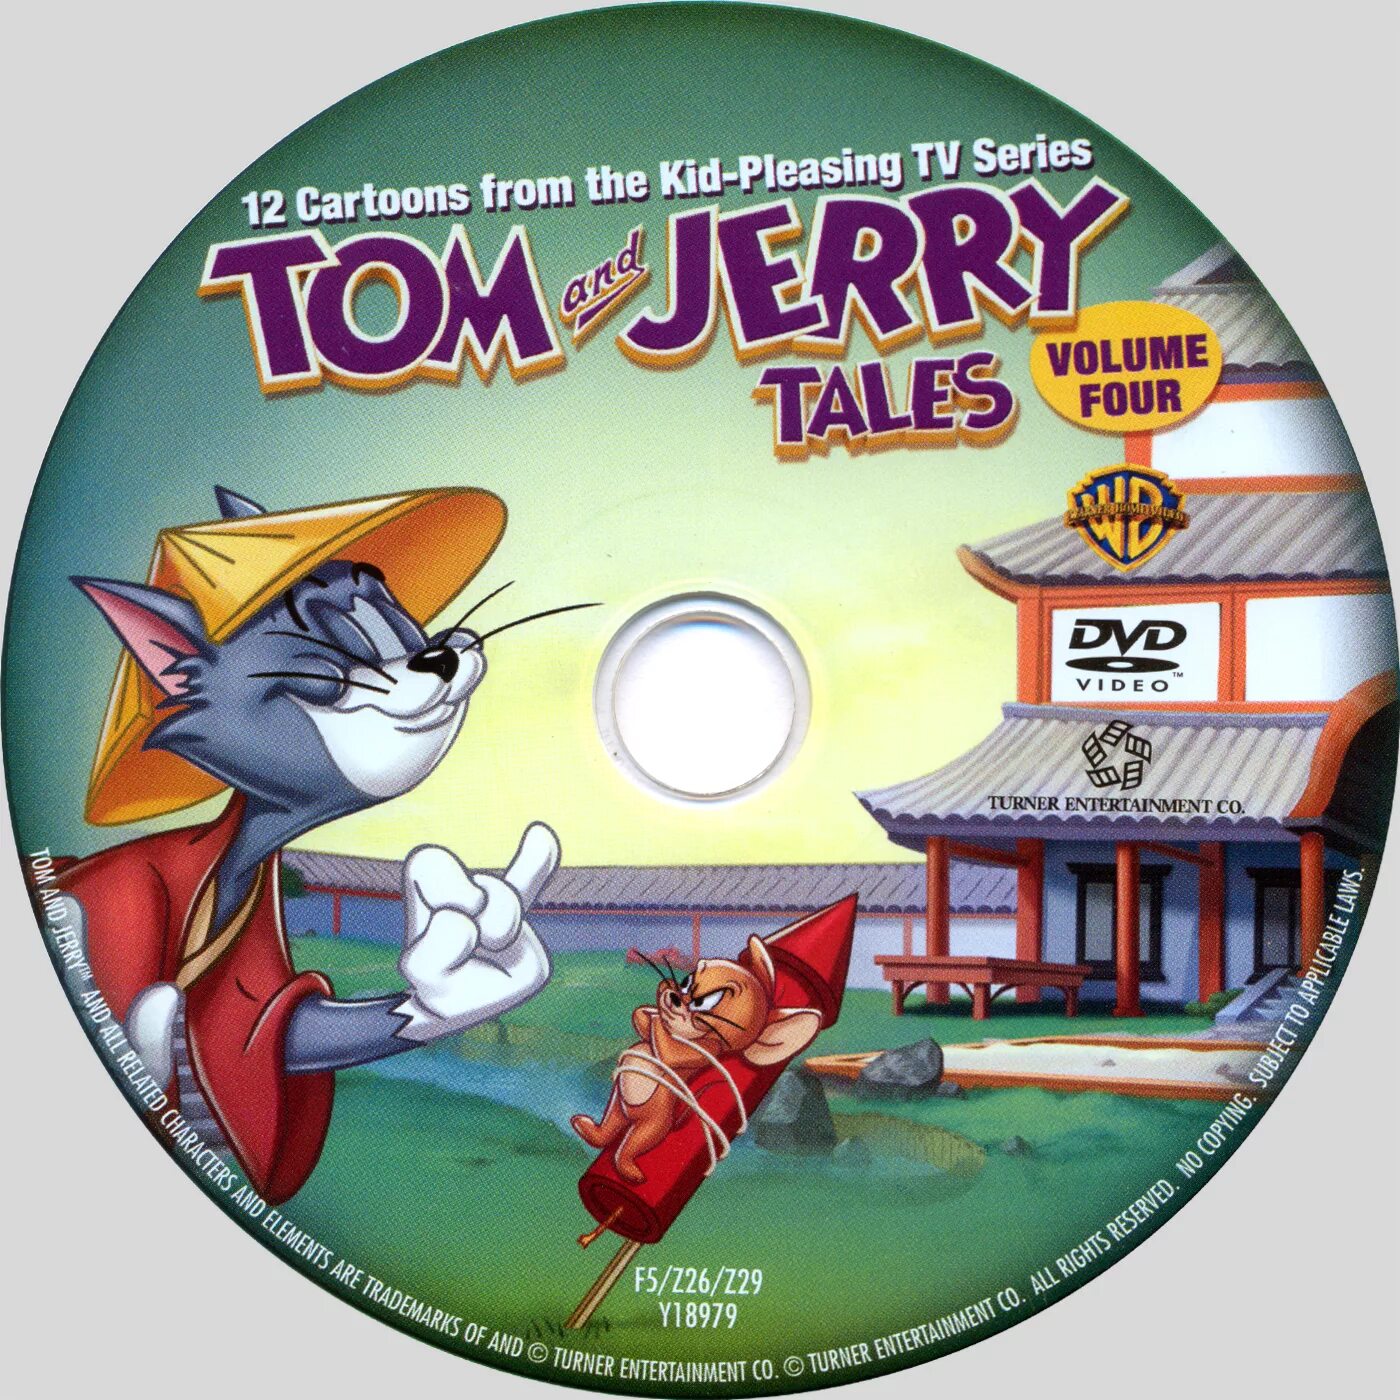 Toms tales. Tom and Jerry двд. Двд диски с мультфильмом том и Джерри. Том и Джерри двд том 2. Tom and Jerry Tales Volume 5 DVD.